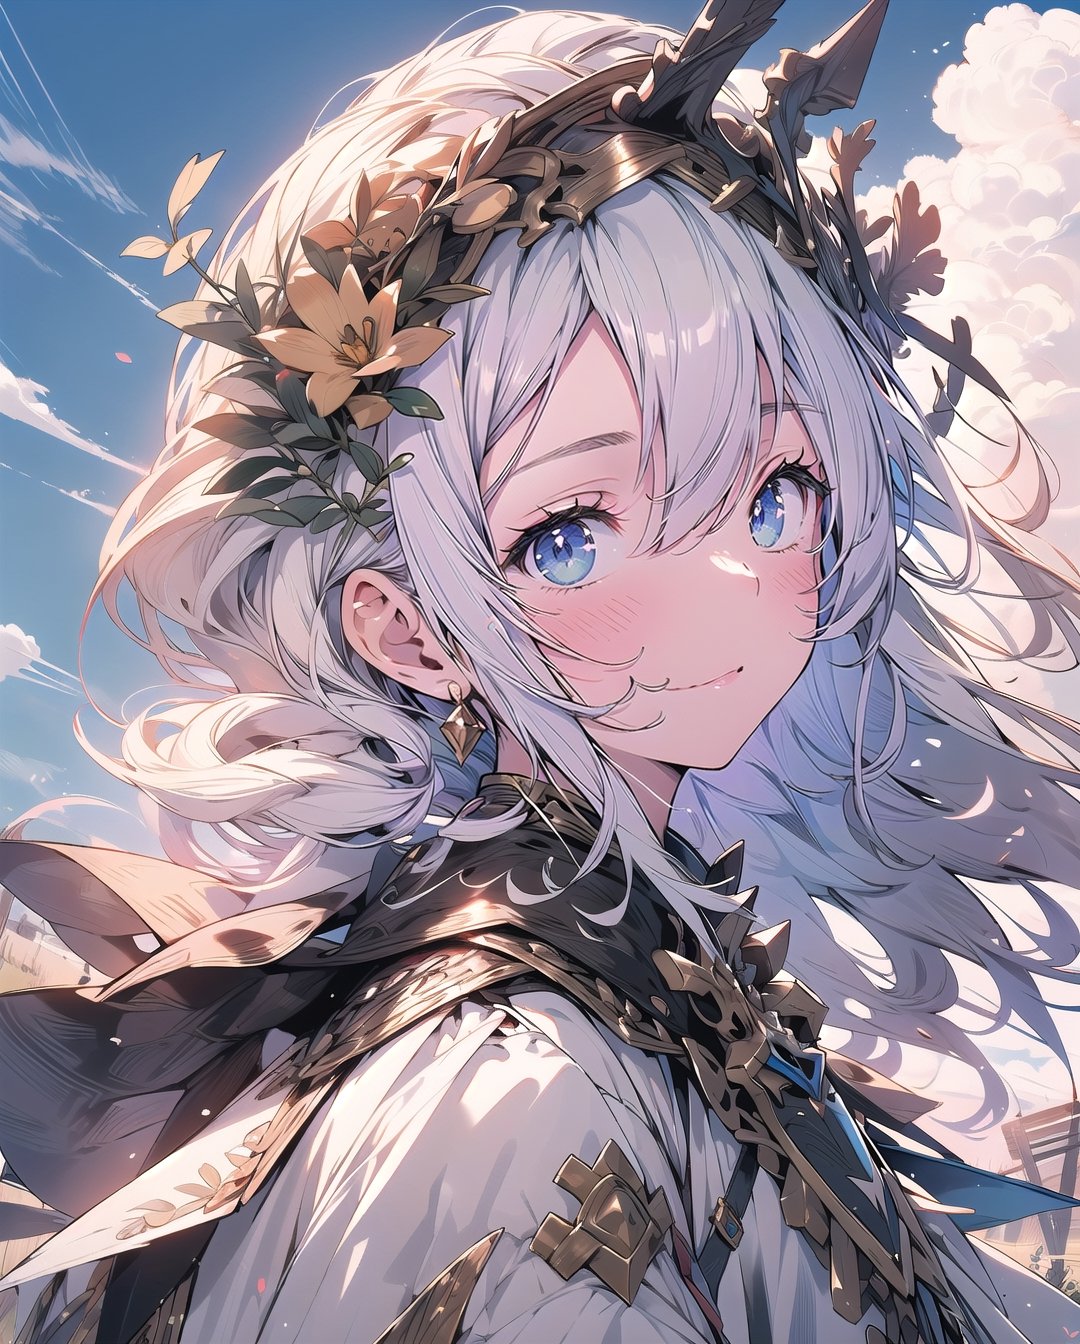 granblue_fantasy, medieval, fantasy, (blue sky and white clouds background), 1 male knight on the left, 1 female knight on the right, outdoors, open grassland, symmetrical composition, low-angle shooting, zoom in, the most beautiful image I have ever seen